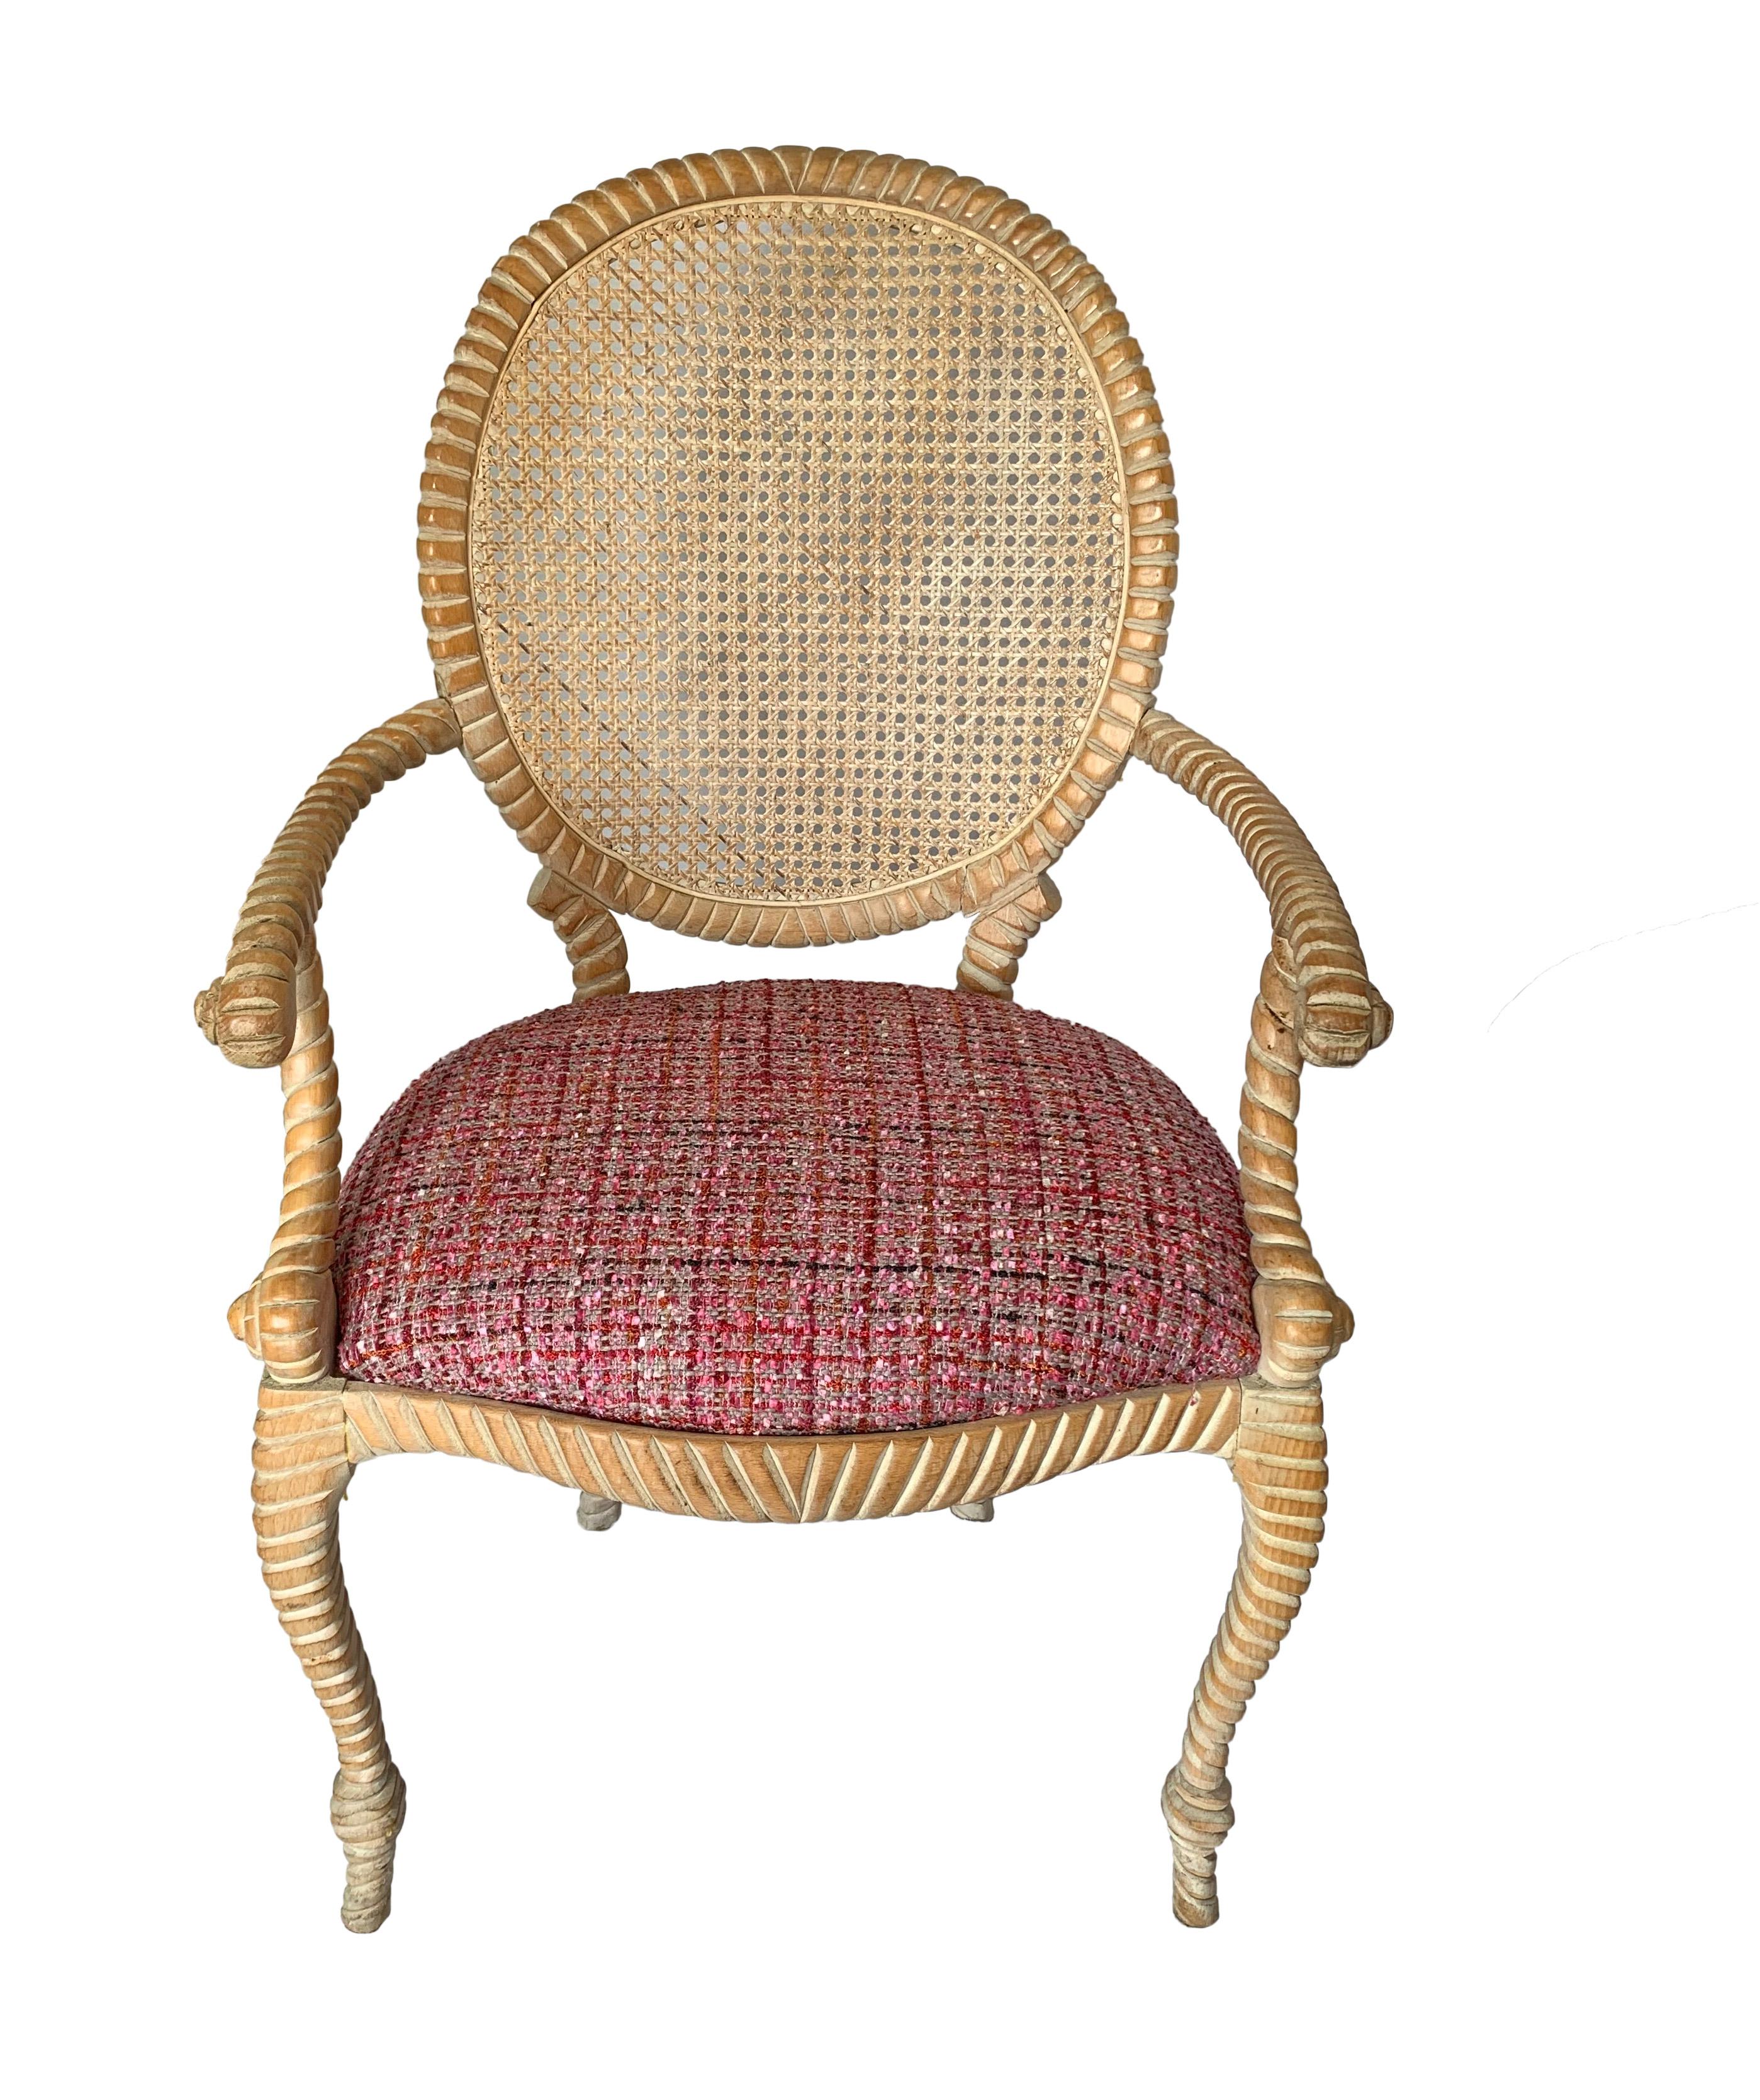 Pair of Napoleon III style classic rope chairs with caned backs from 1960s. Few pieces of furniture can claim to have origins as diverse as the Classic rope chair. Created by the Parisian upholsterer A.M.E. Fournier in 1860s, his exceptionally